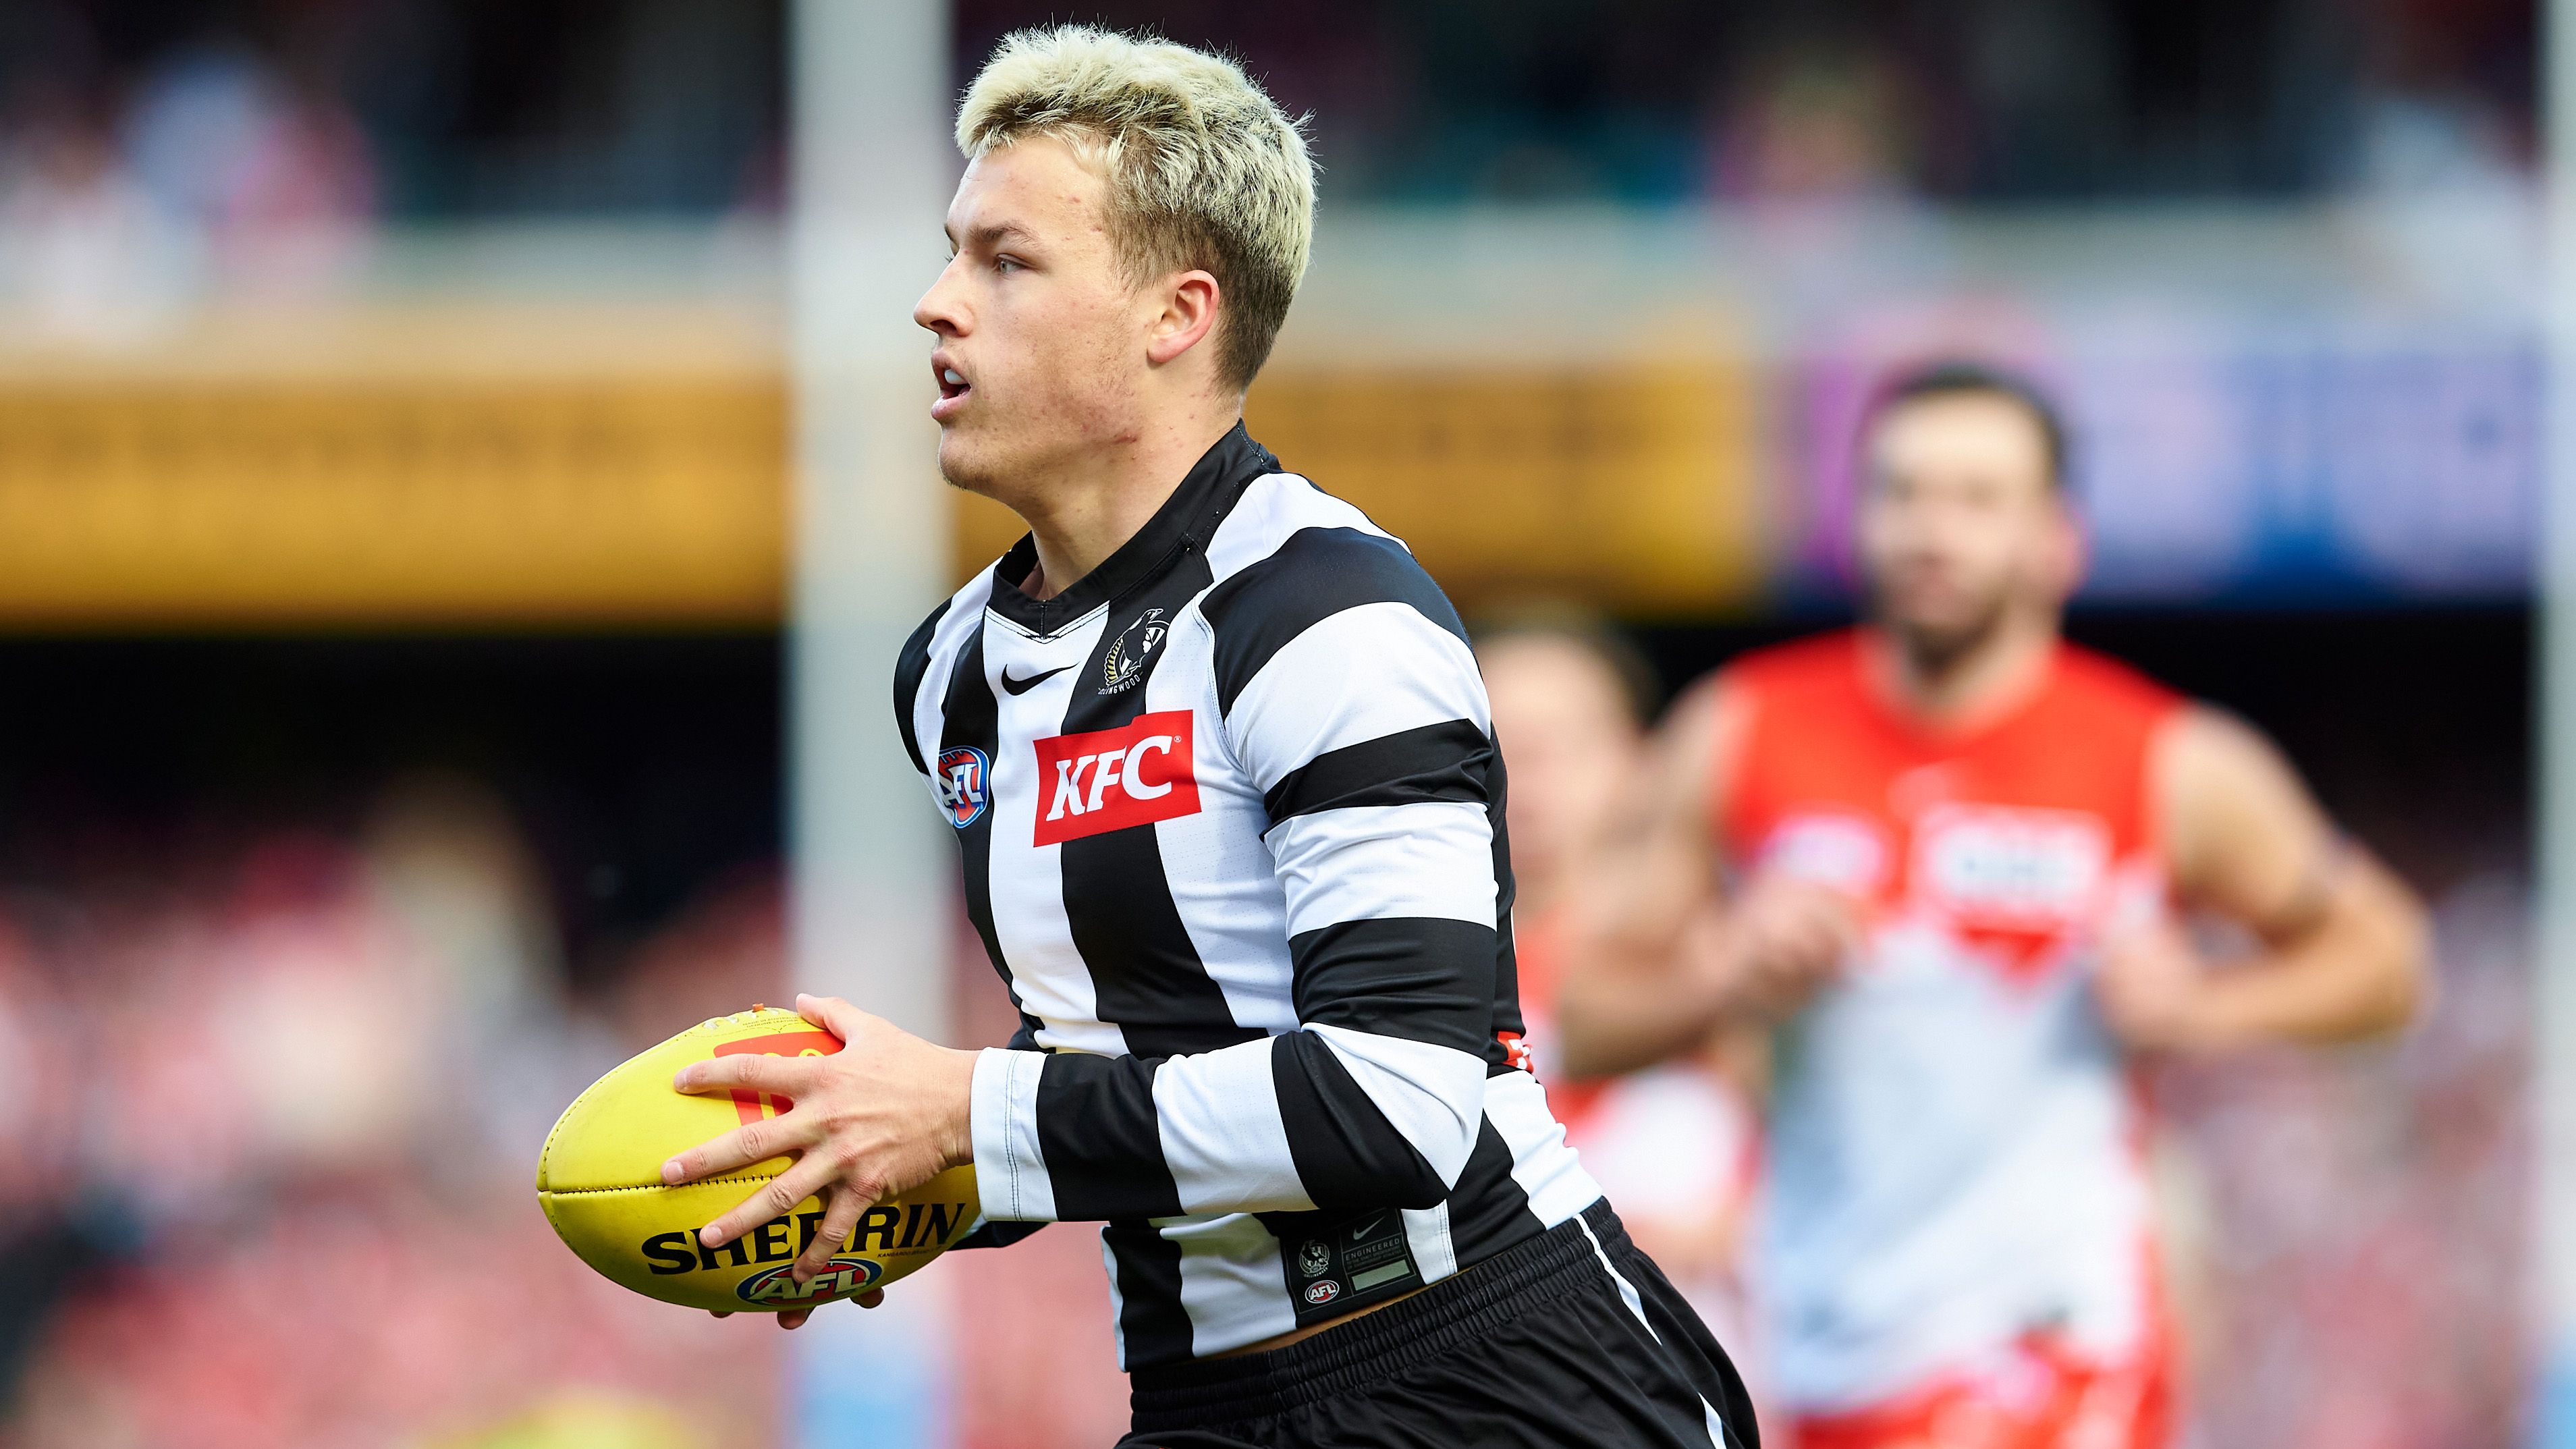 Jack Ginnivan of the Magpies controls the ball during the round 22 AFL match between the Sydney Swans and the Collingwood Magpies at Sydney Cricket Ground on August 14, 2022 in Sydney, Australia. (Photo by Brett Hemmings/AFL Photos/via Getty Images )